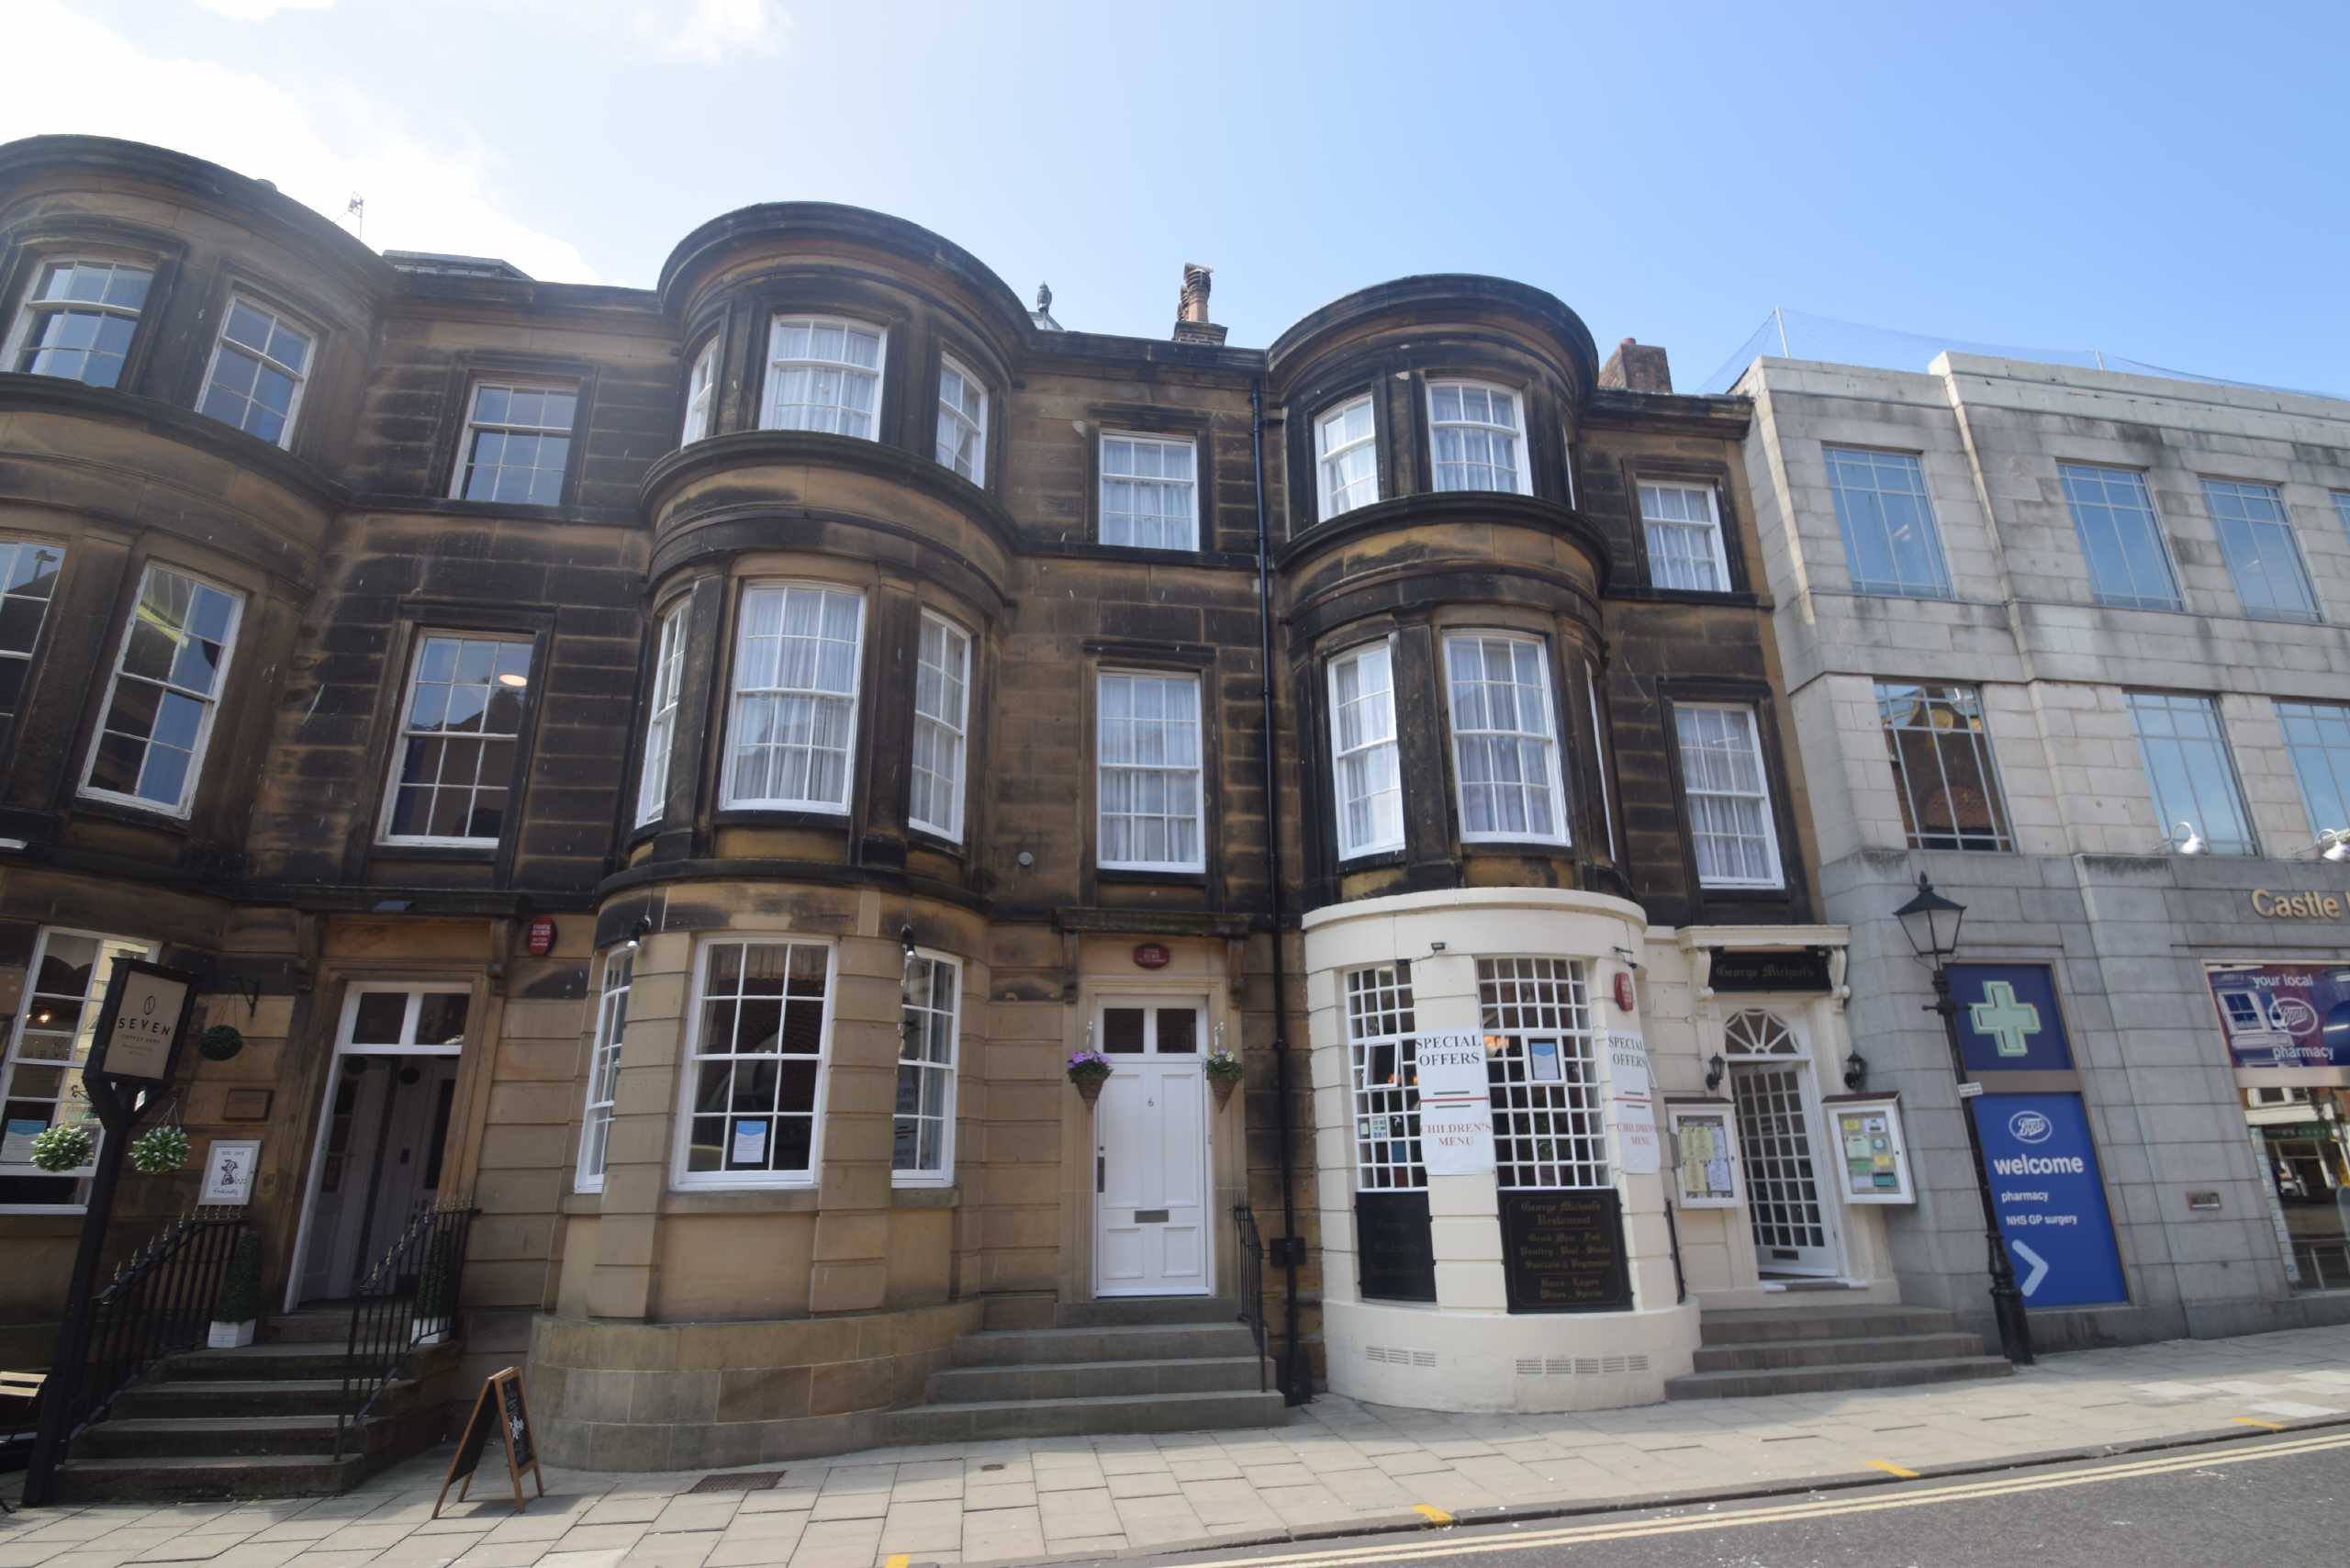  for sale in York Place, Scarborough  - Property Image 1